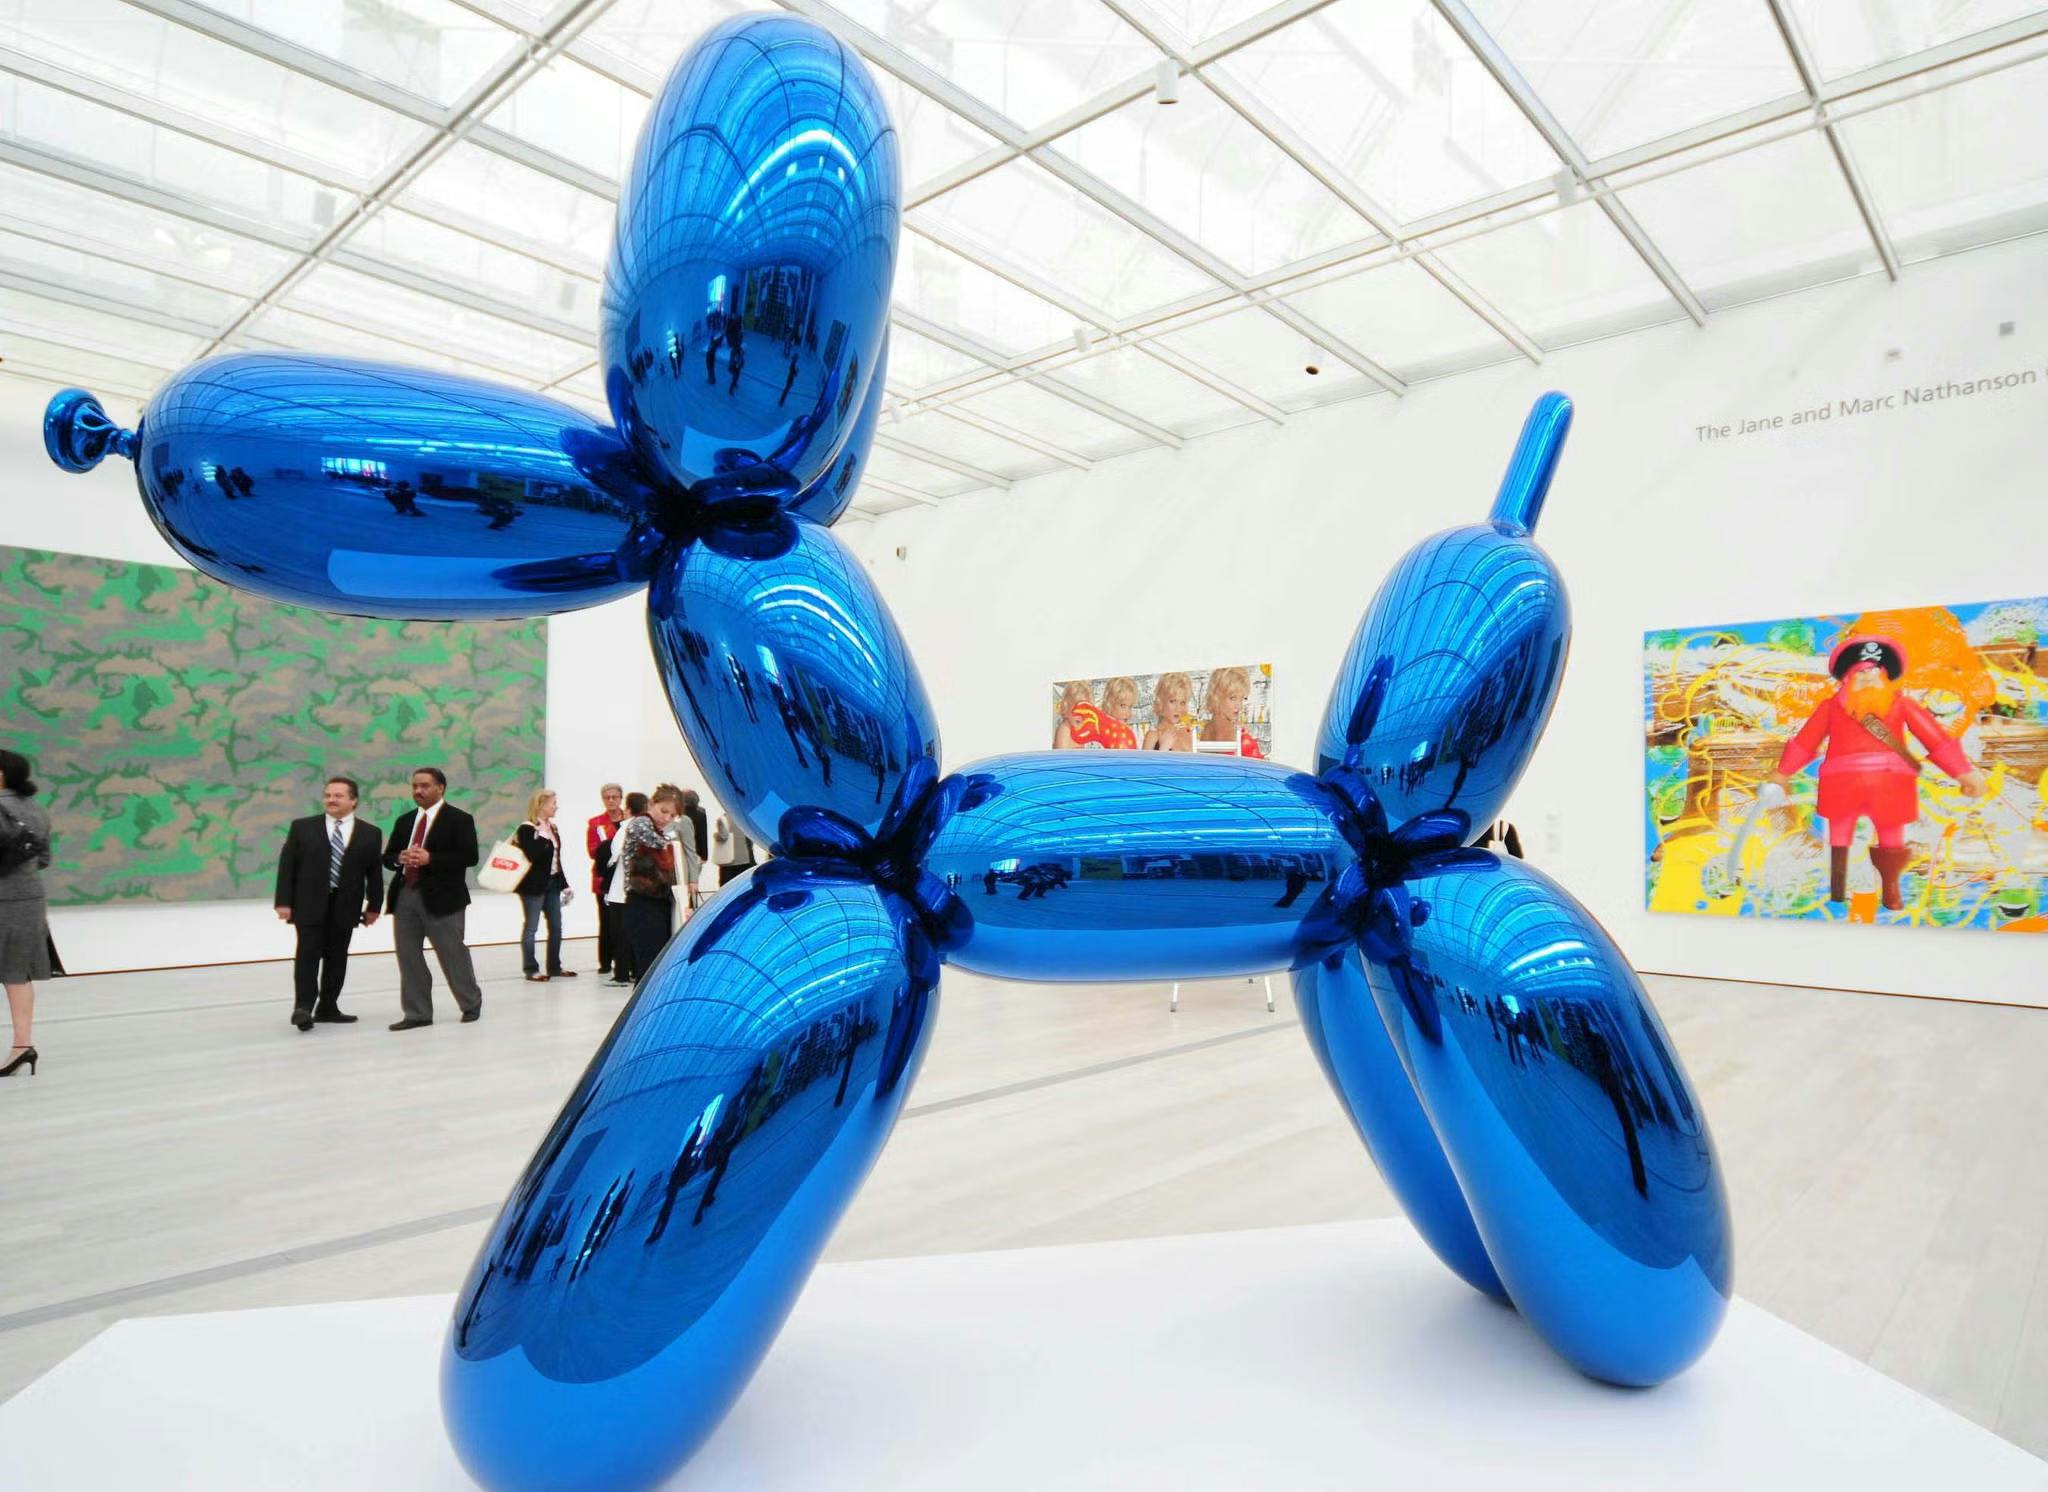 One of Jeff Koons' balloon dogs, photographed at the opening of the Broad Contemporary Art Museum, Los Angeles, 7 Feb 2008 (REX)